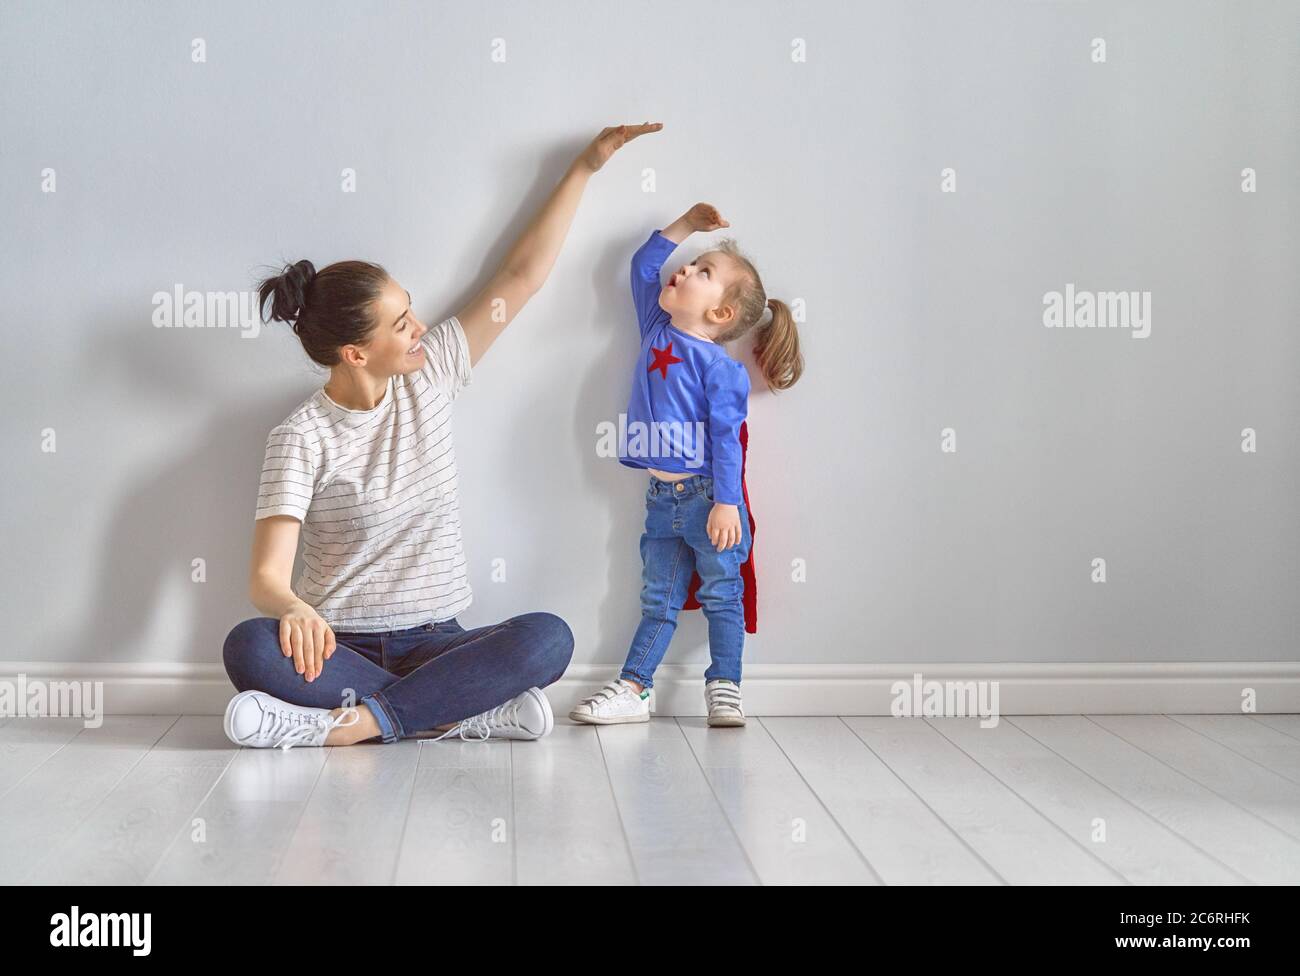 Mother is measuring growth of child daughter near empty wall. Girl in superhero costume. Stock Photo